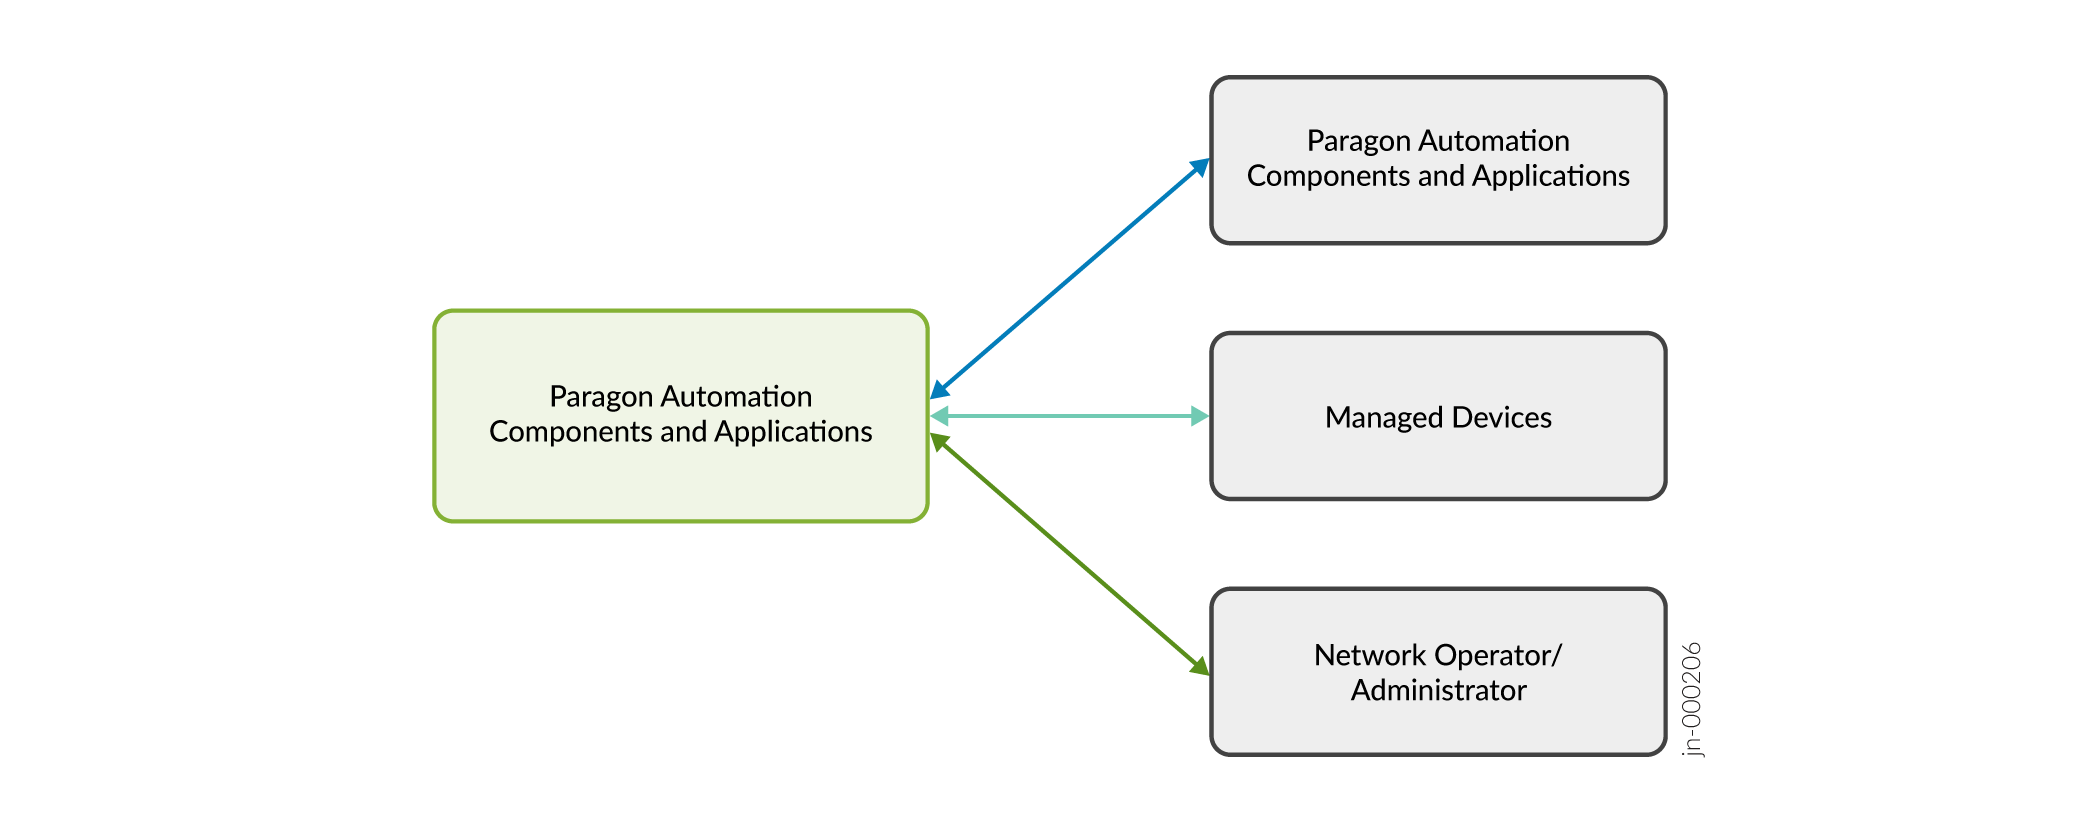 Typical Paragon Automation Deployment